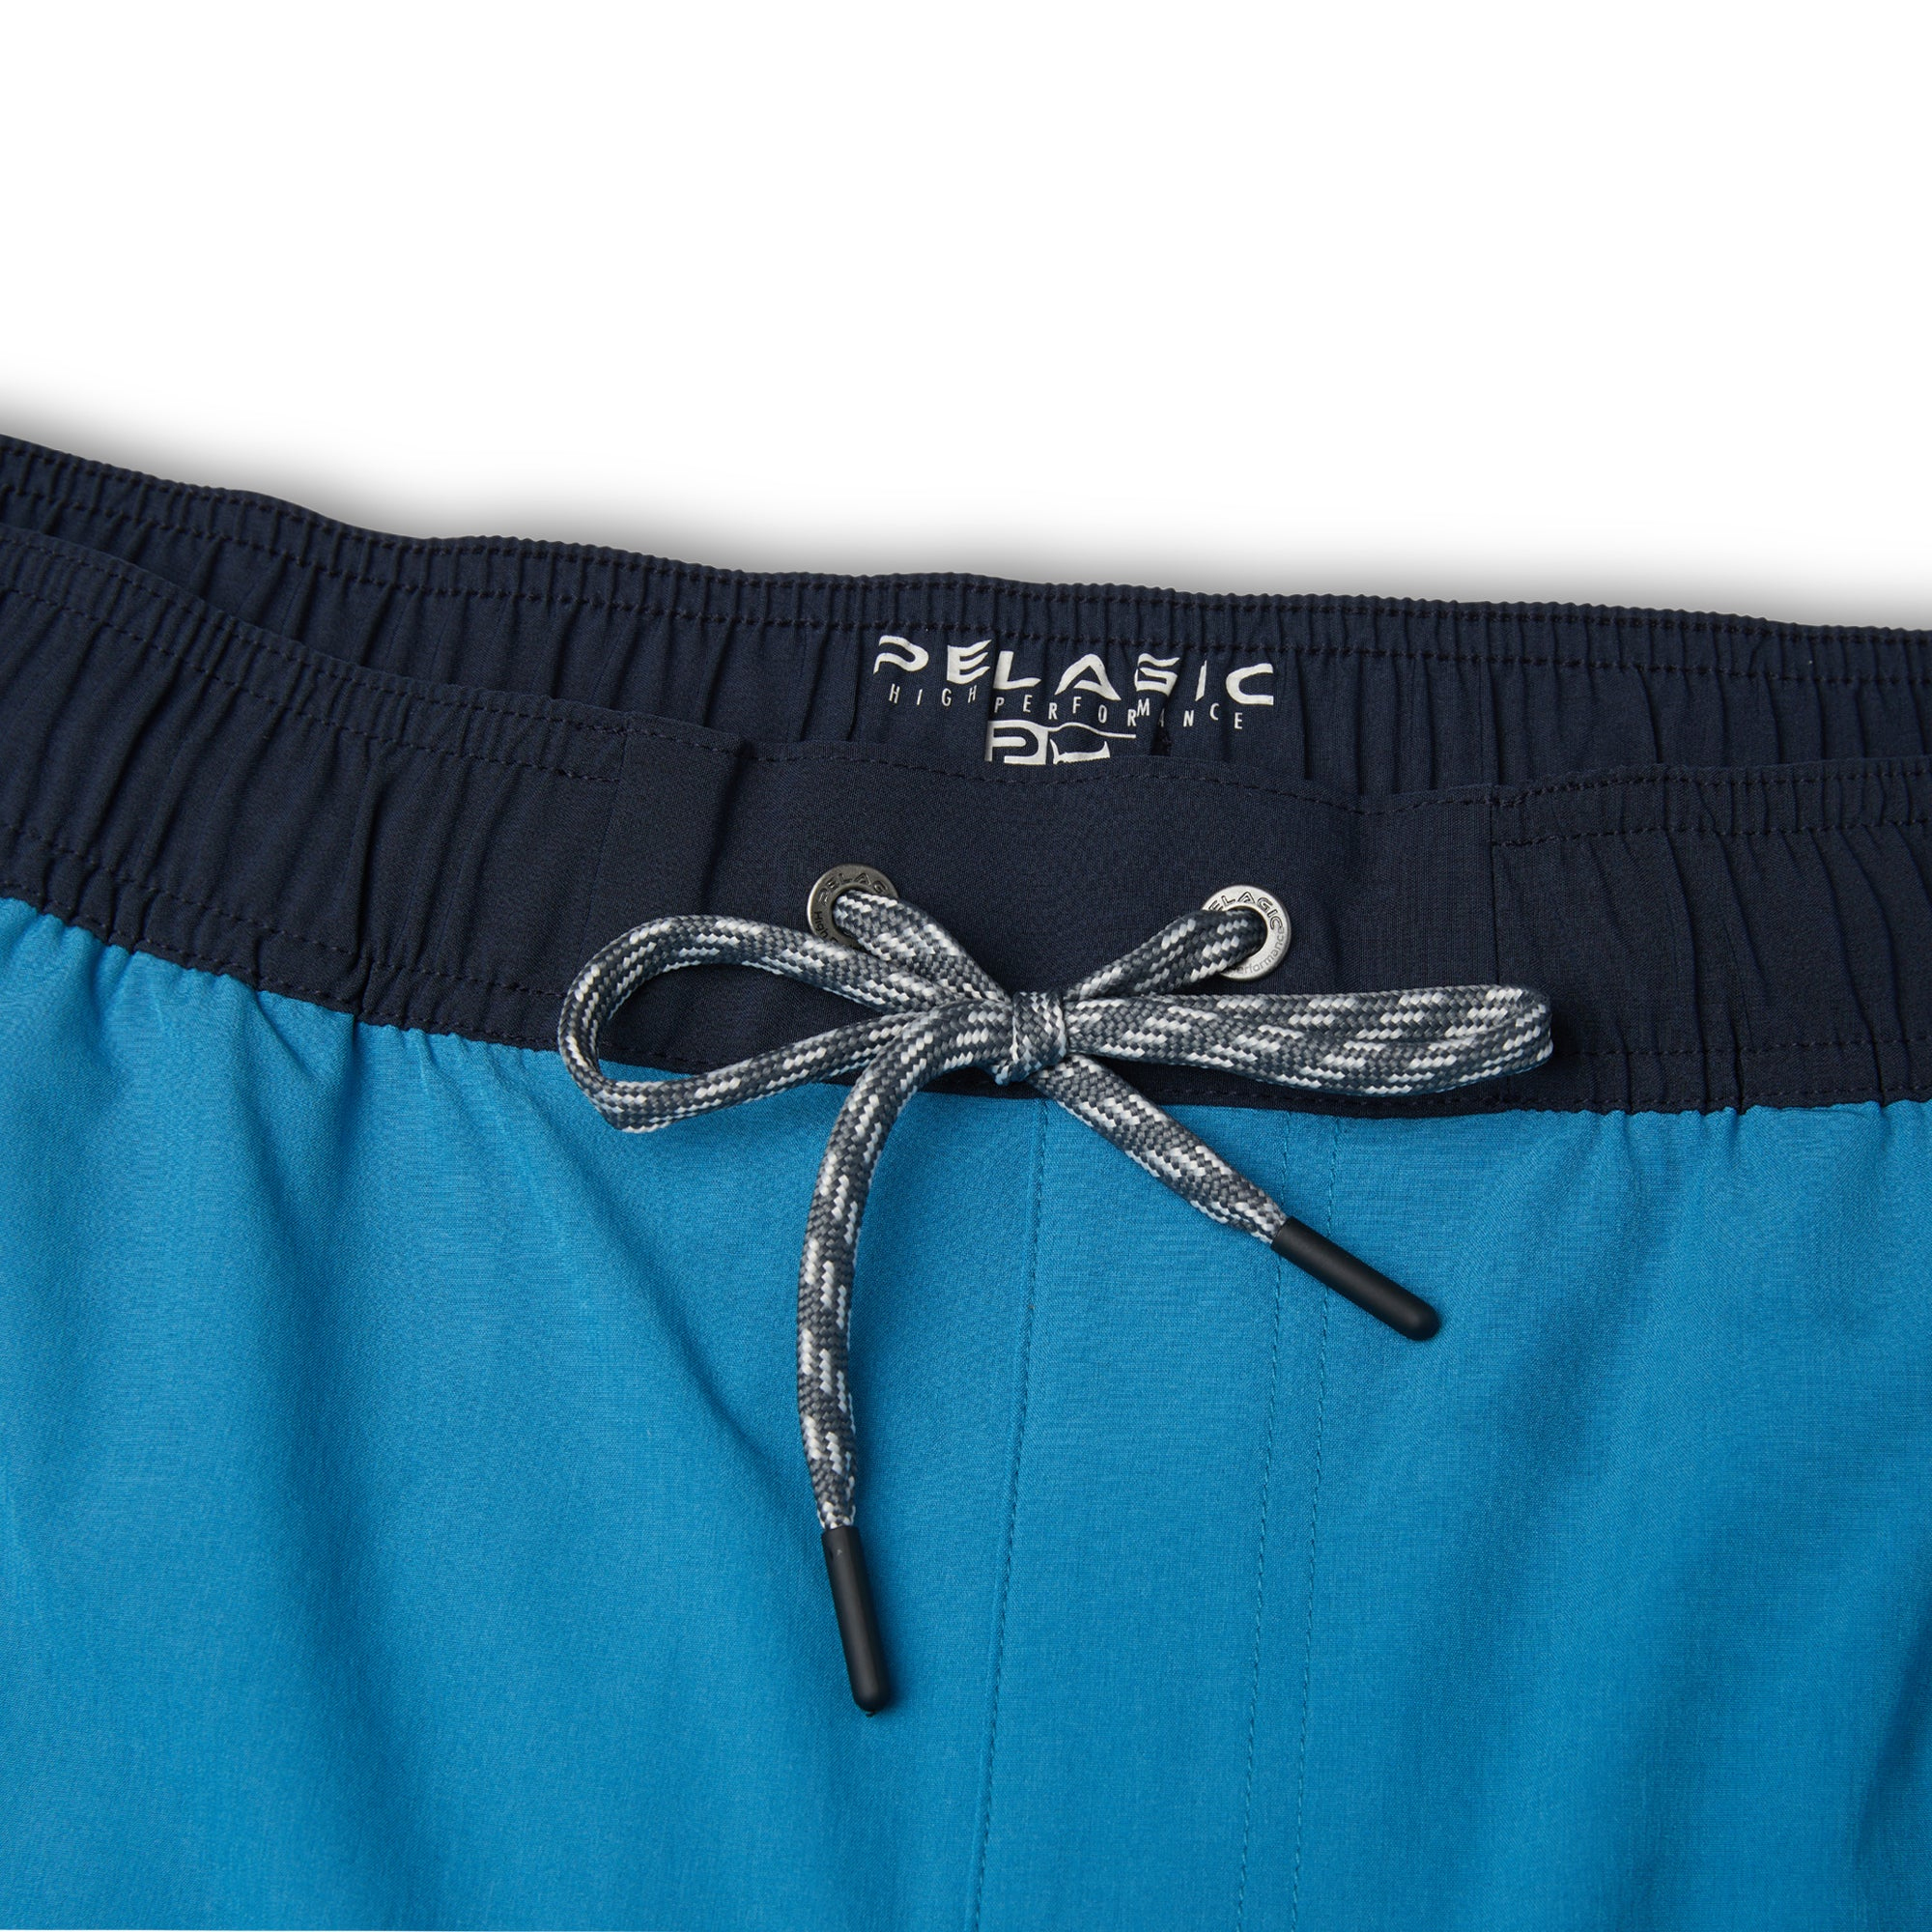 Pelagic Downswell Solid Volley shorts